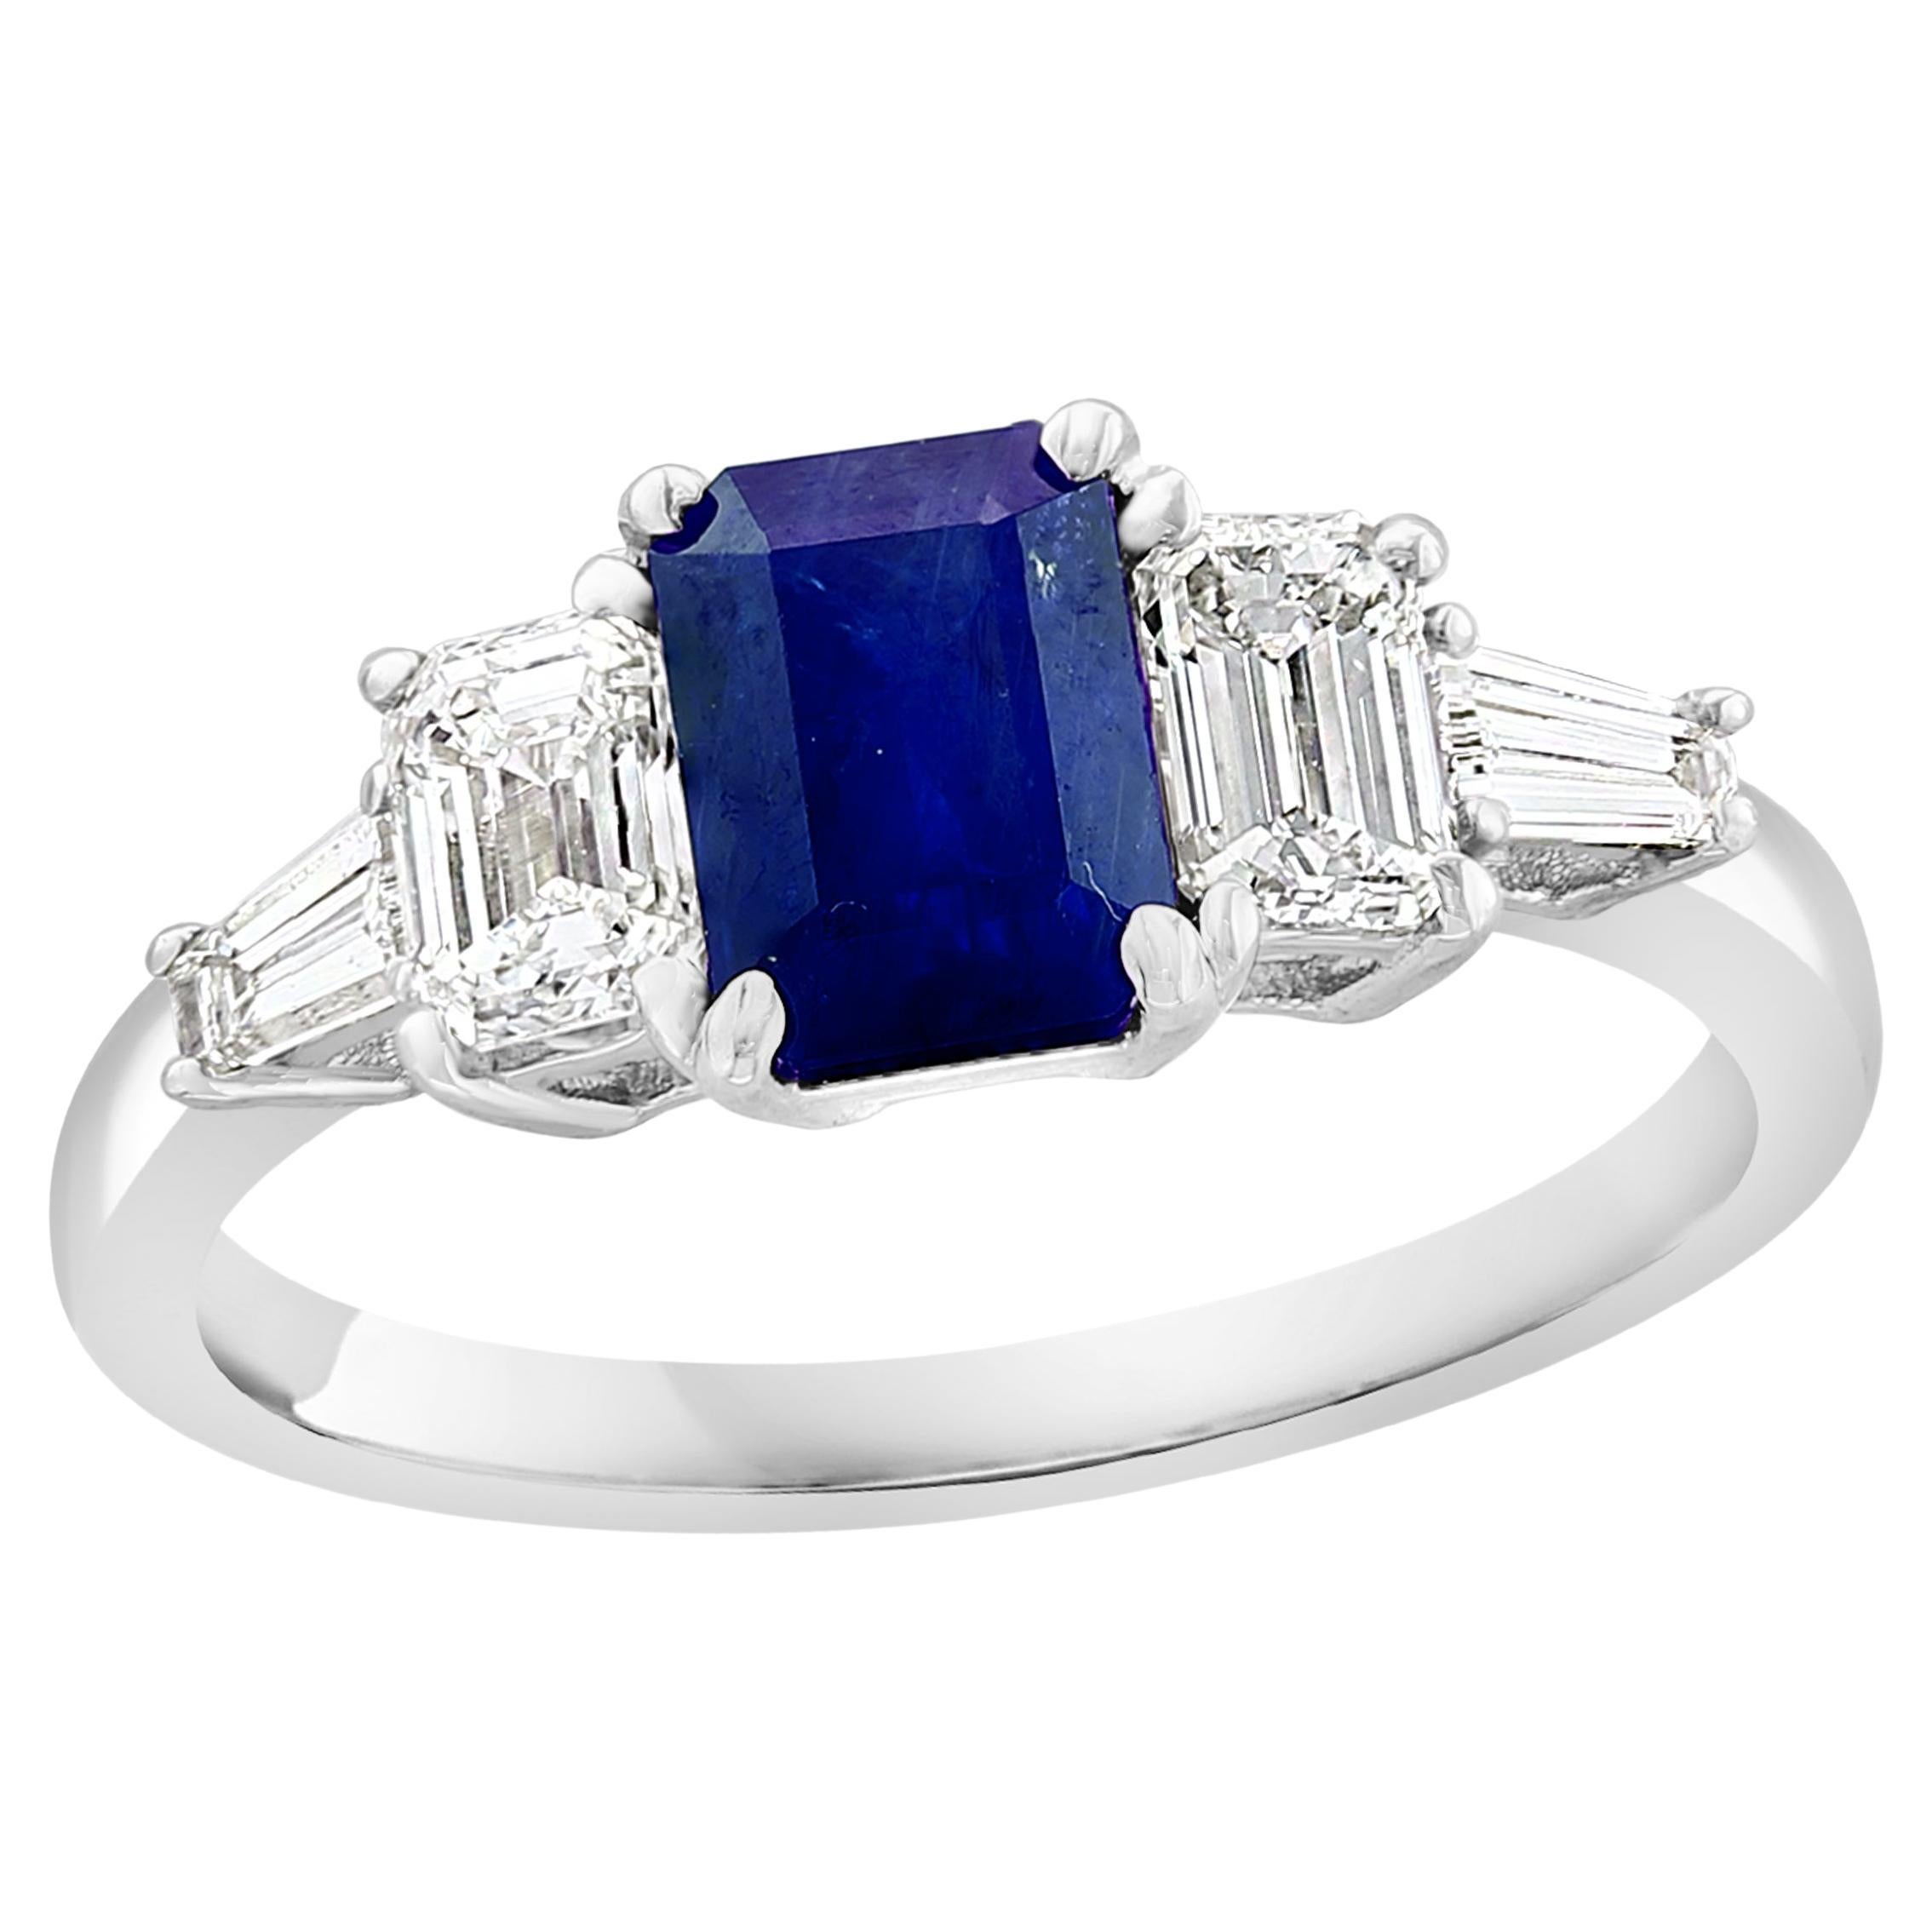 1.12 Carat Emerald Cut Blue Sapphire and Diamond 5 Stone Ring in 14K White Gold